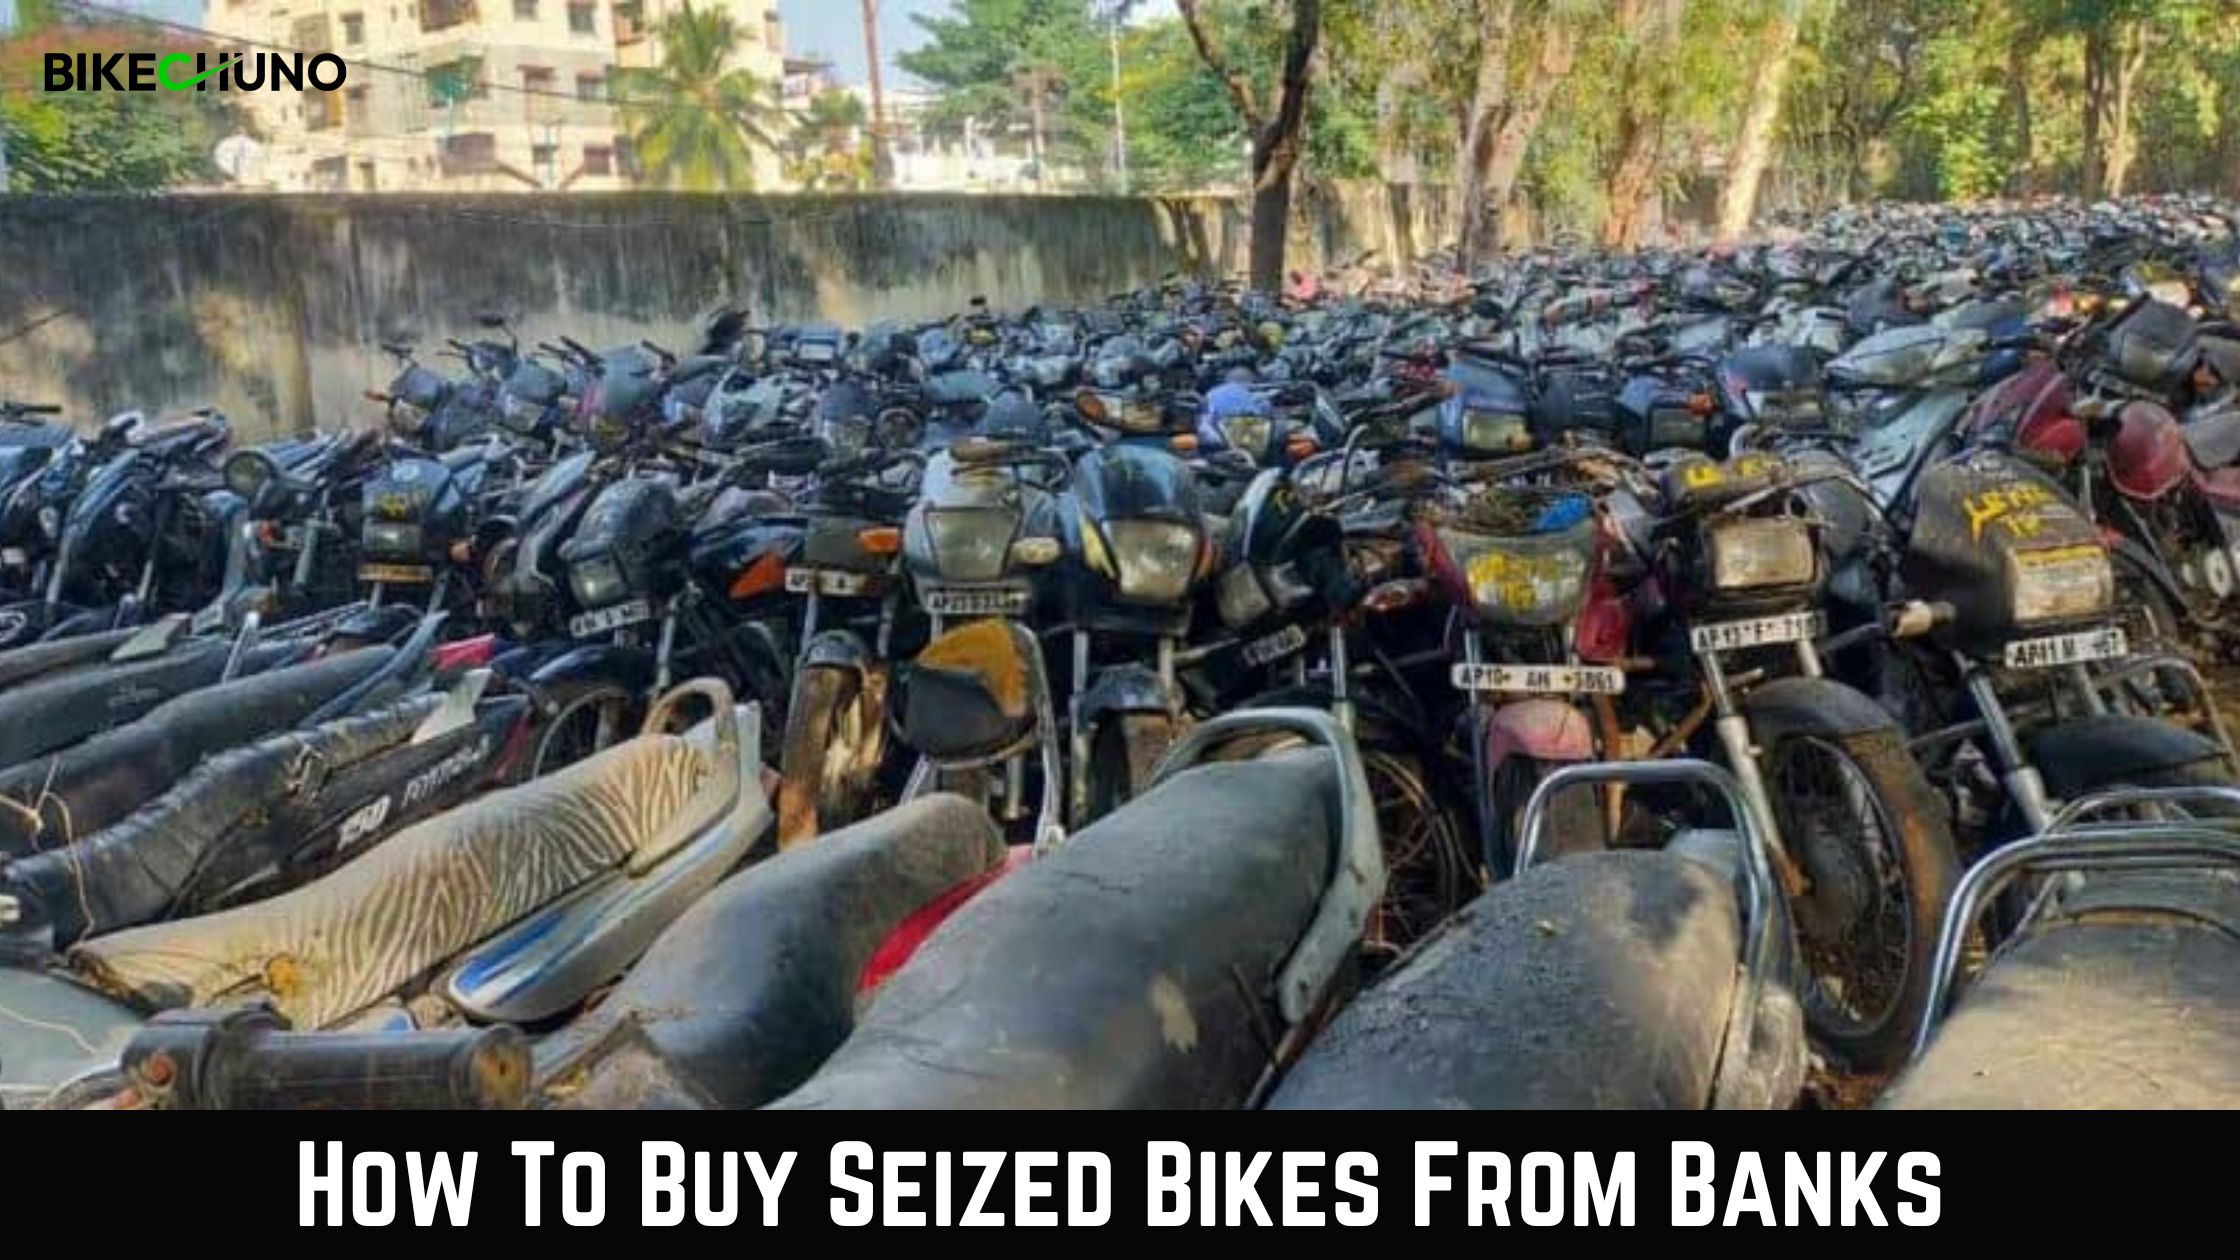 How To Buy Seized Bikes From Banks